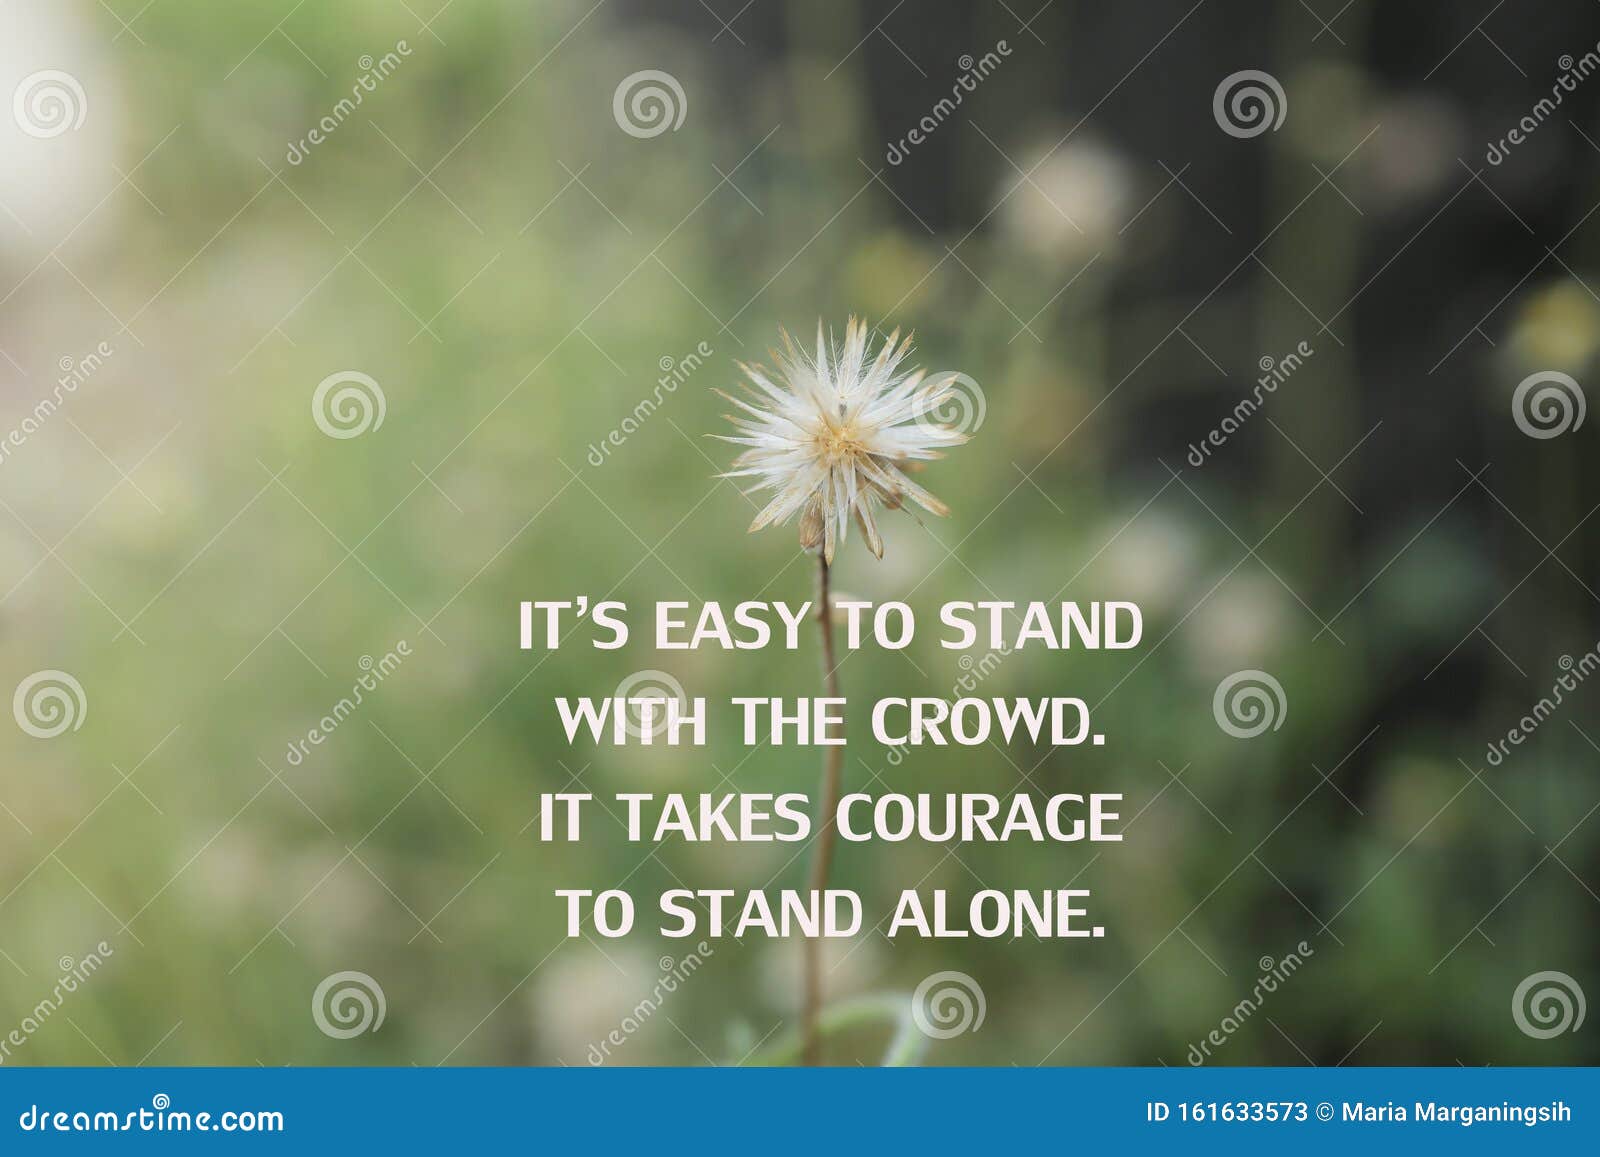 inspirational quote - it is easy to stand with the crowd. it takes courage to stand alone. with white wild flower & green meadow